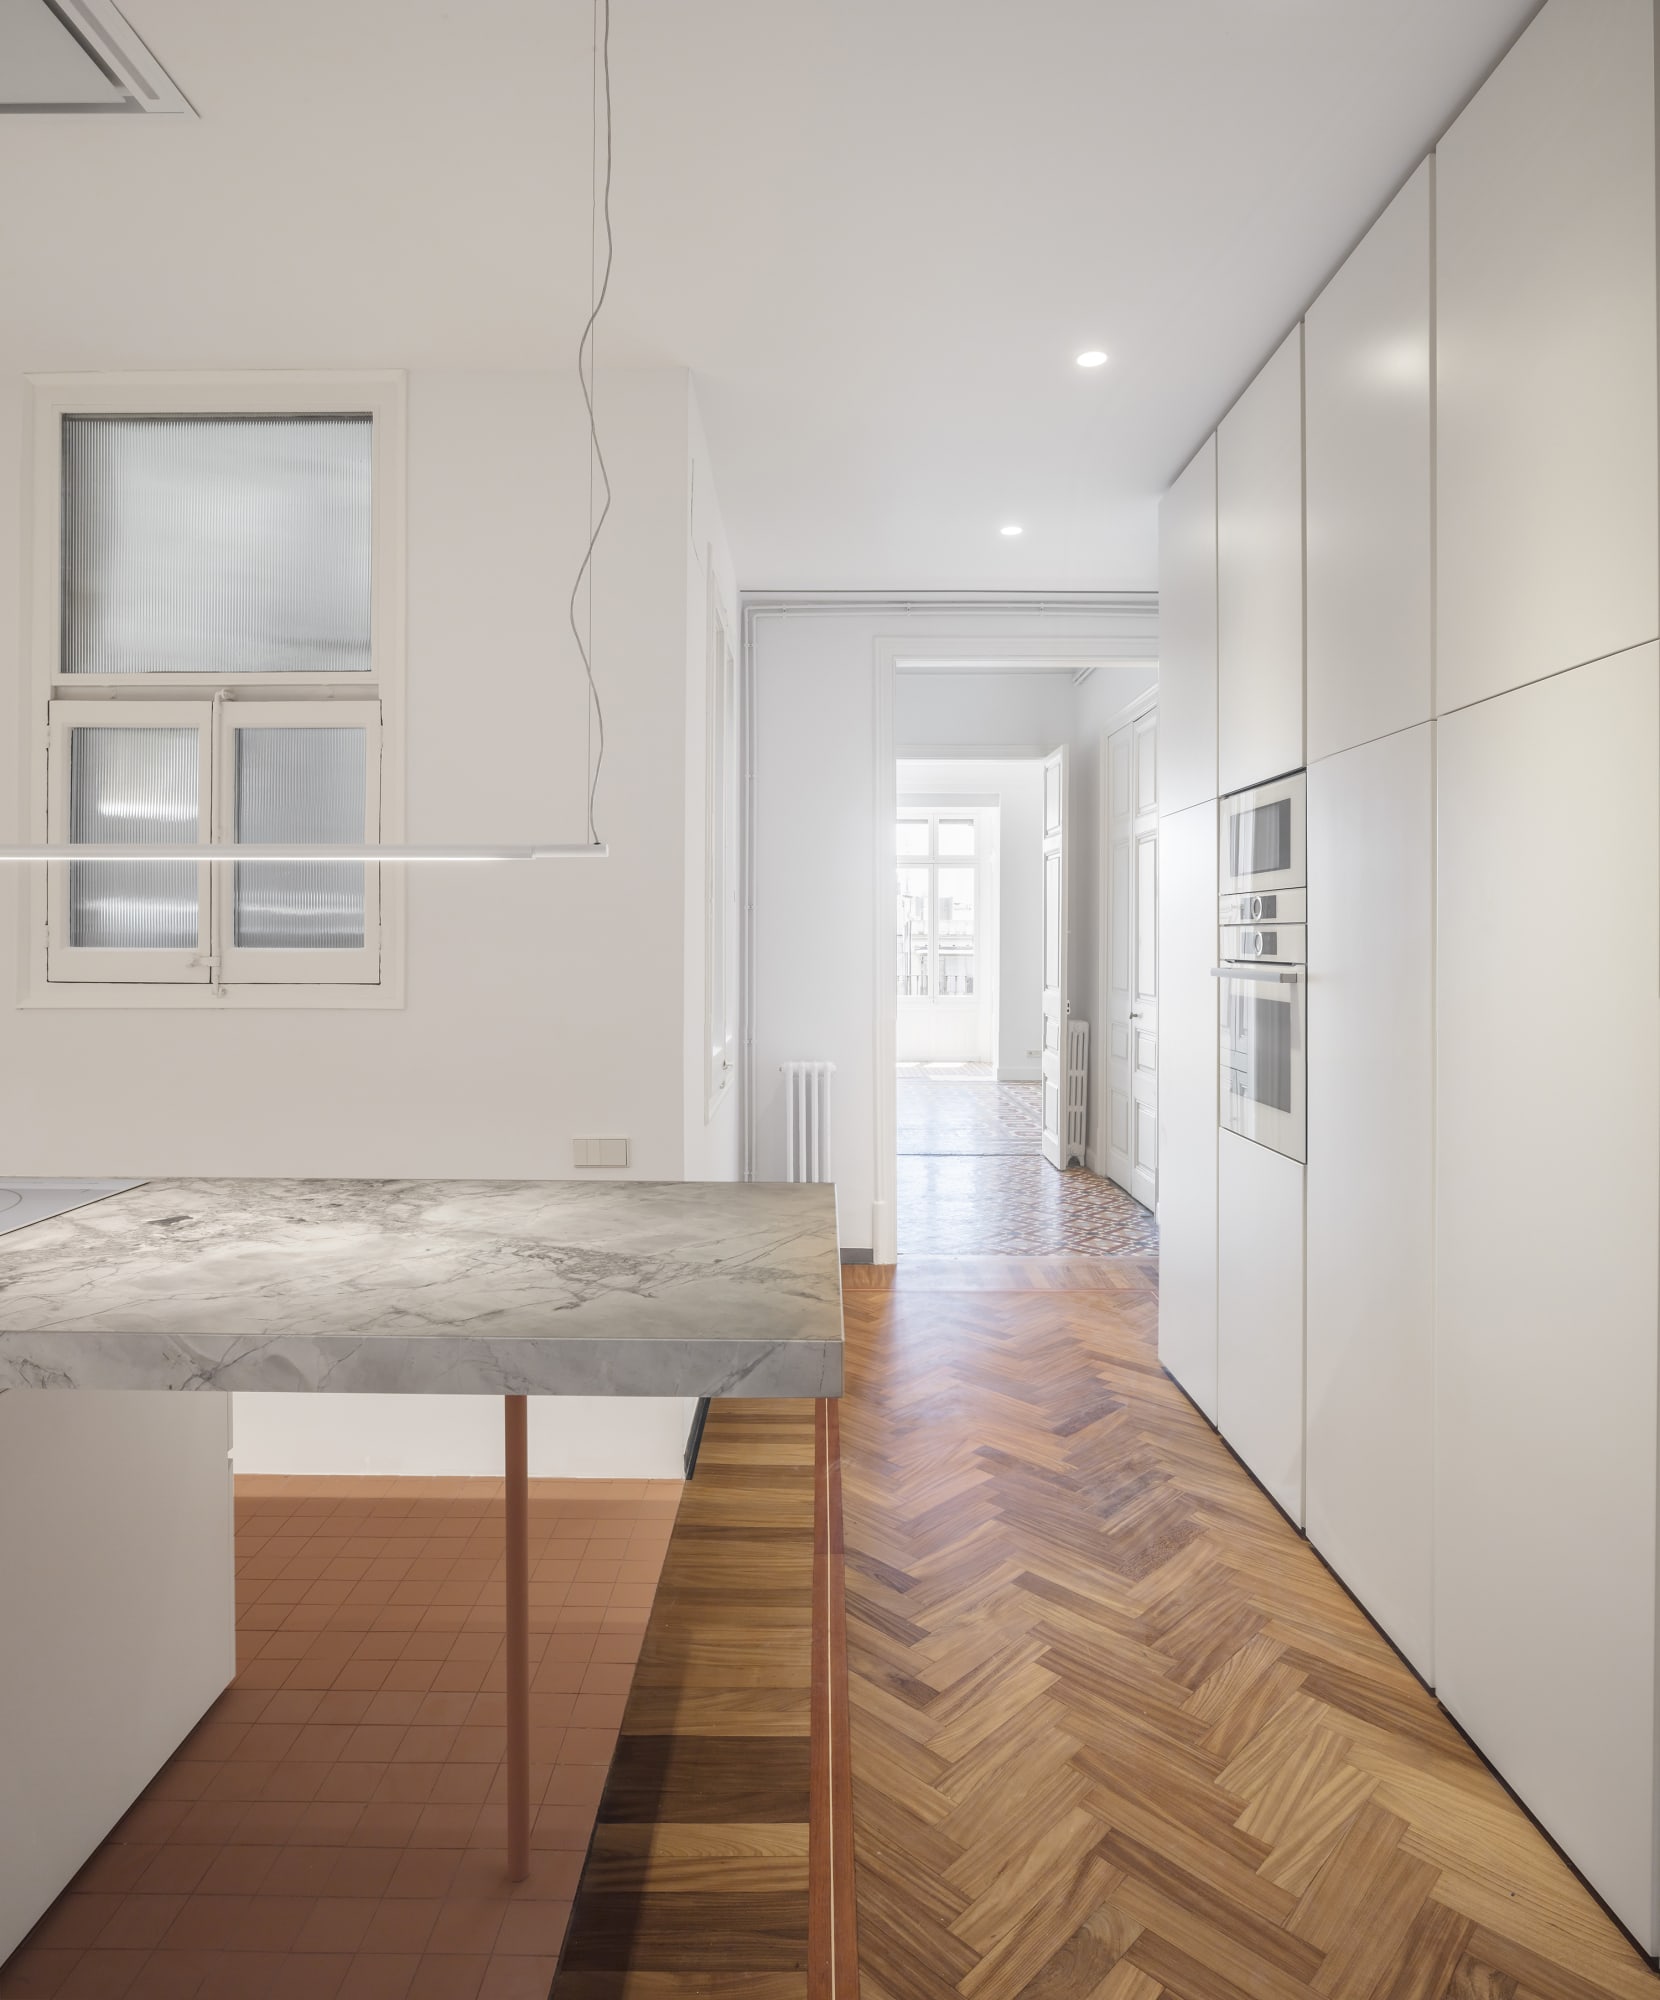 Image of cru adria goula la carla in A seamless worktop for a Nordic home renovated with love - Cosentino